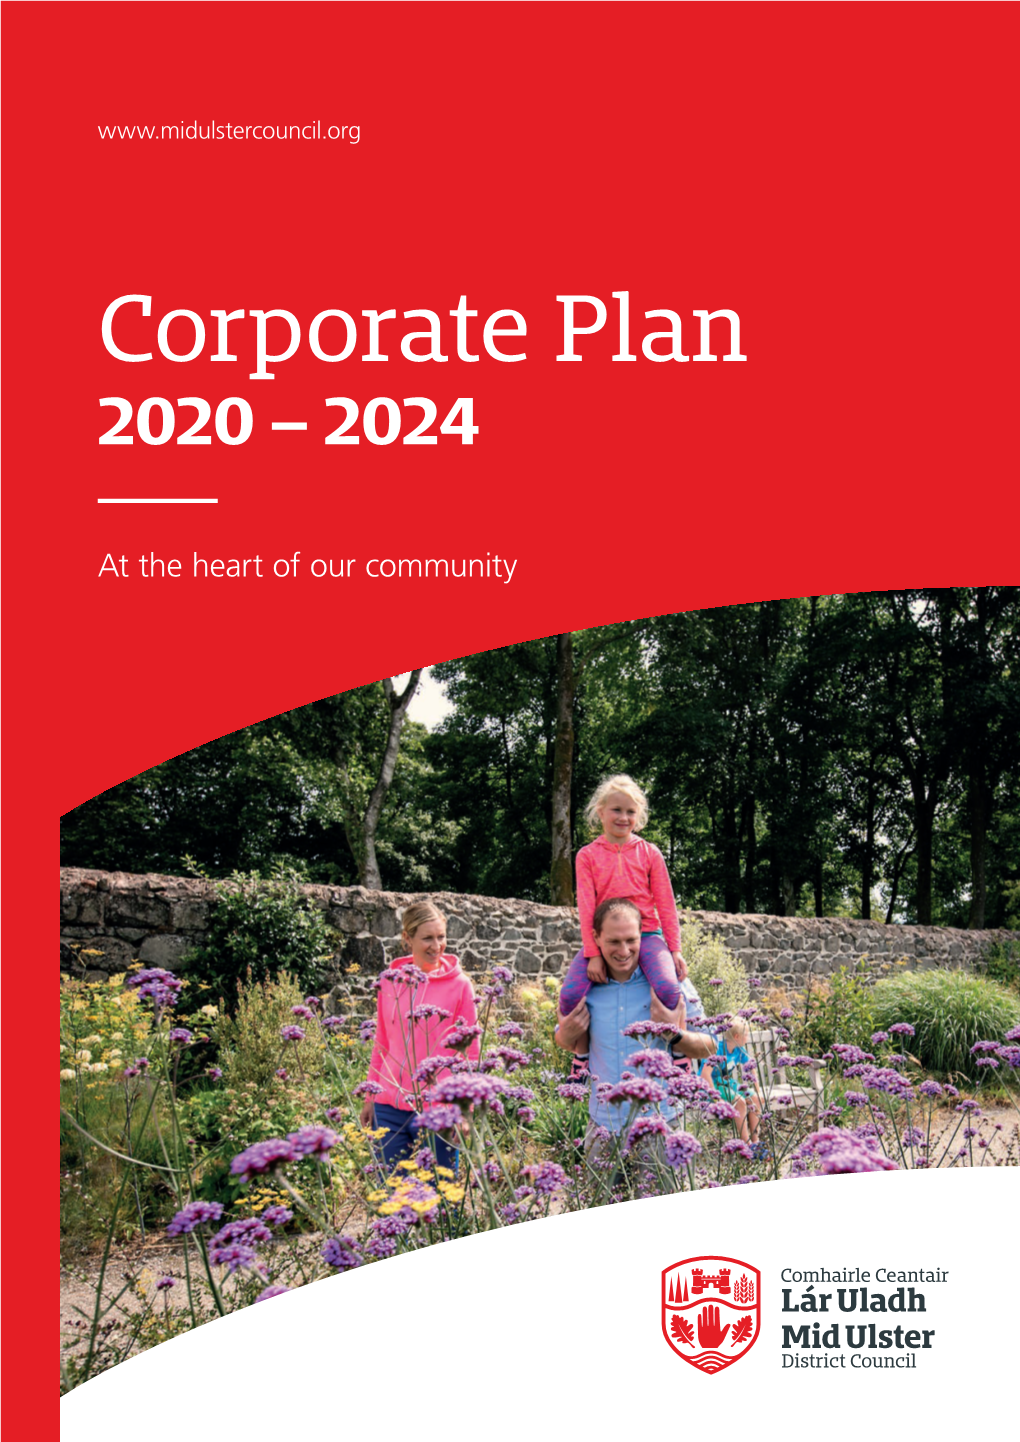 Mid Ulster District Council Corporate Plan 2020-2024